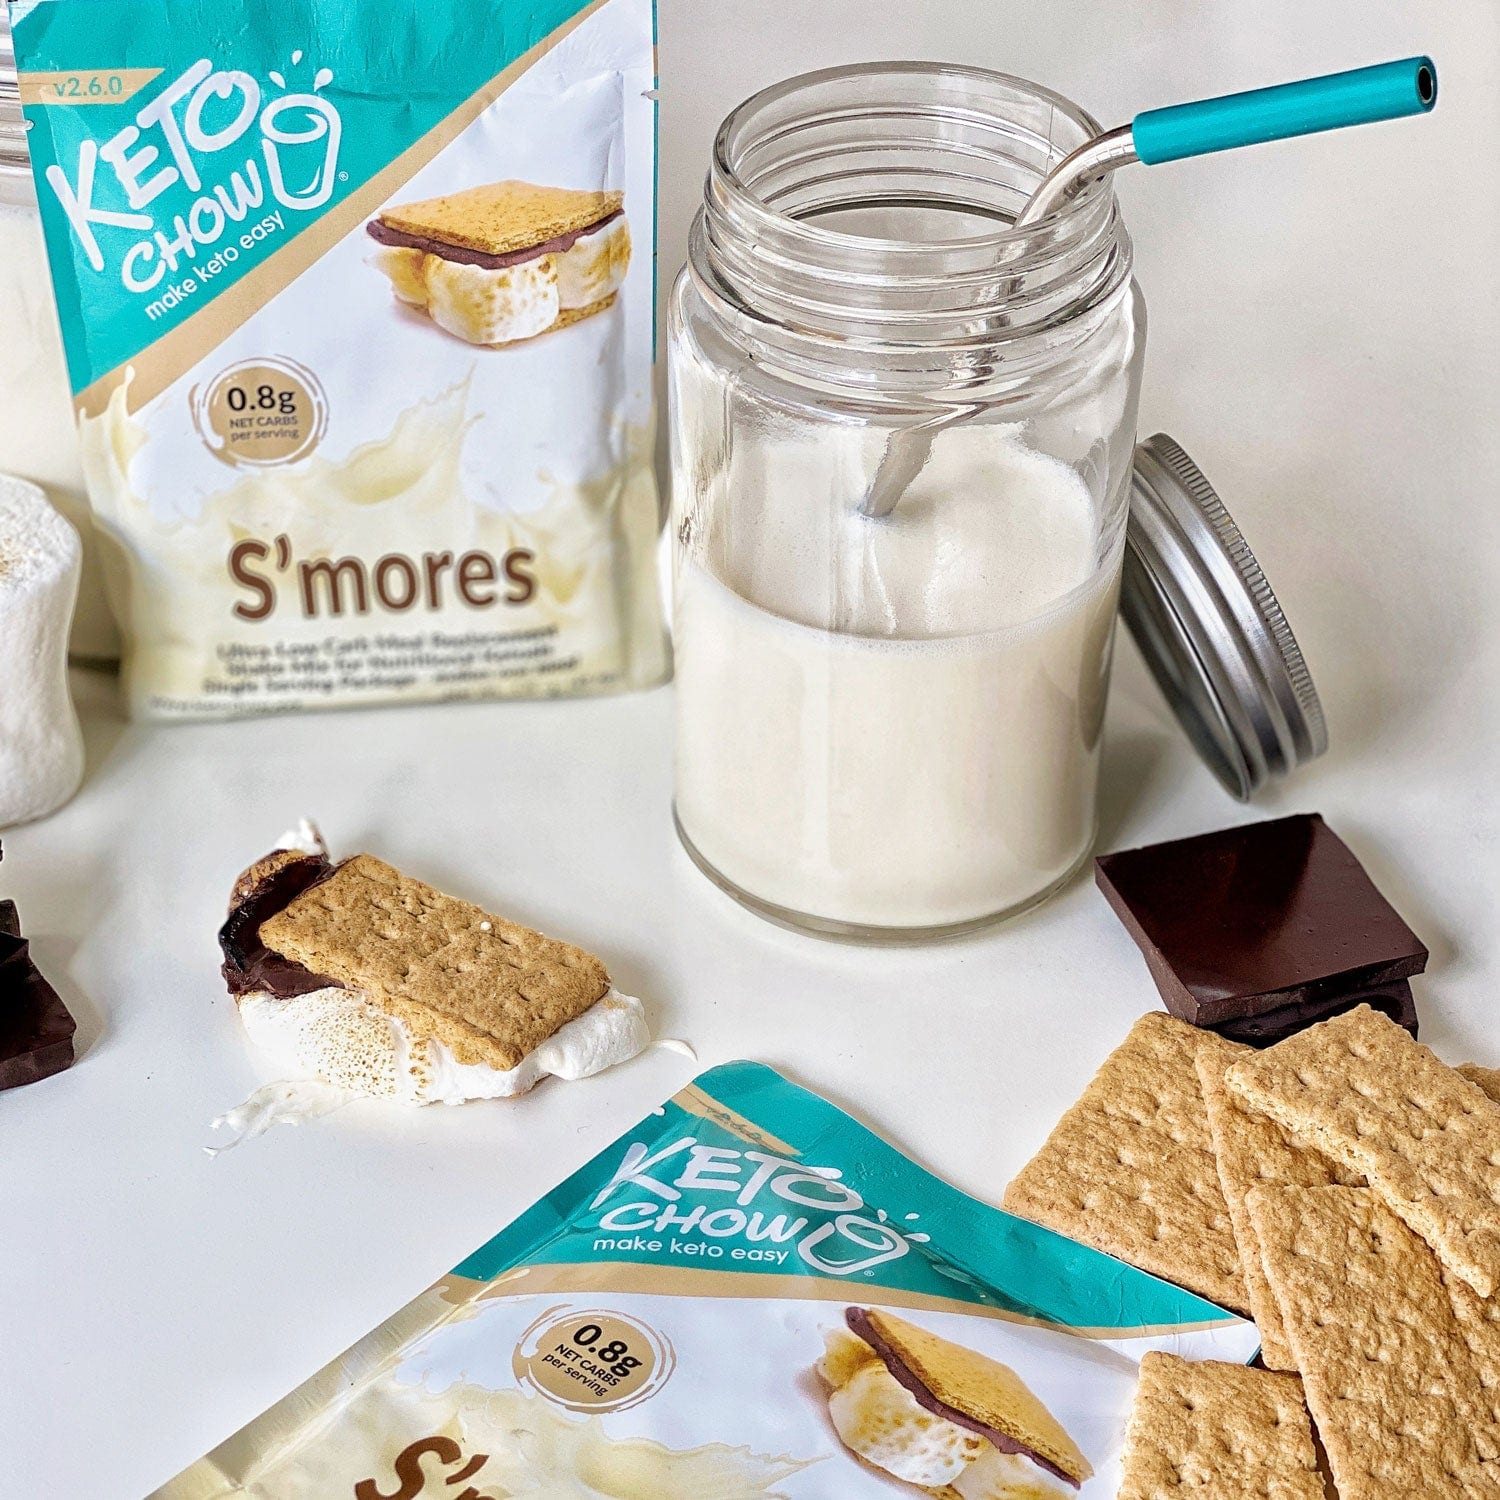 S'mores Keto Chow Single Meal Packet and shake